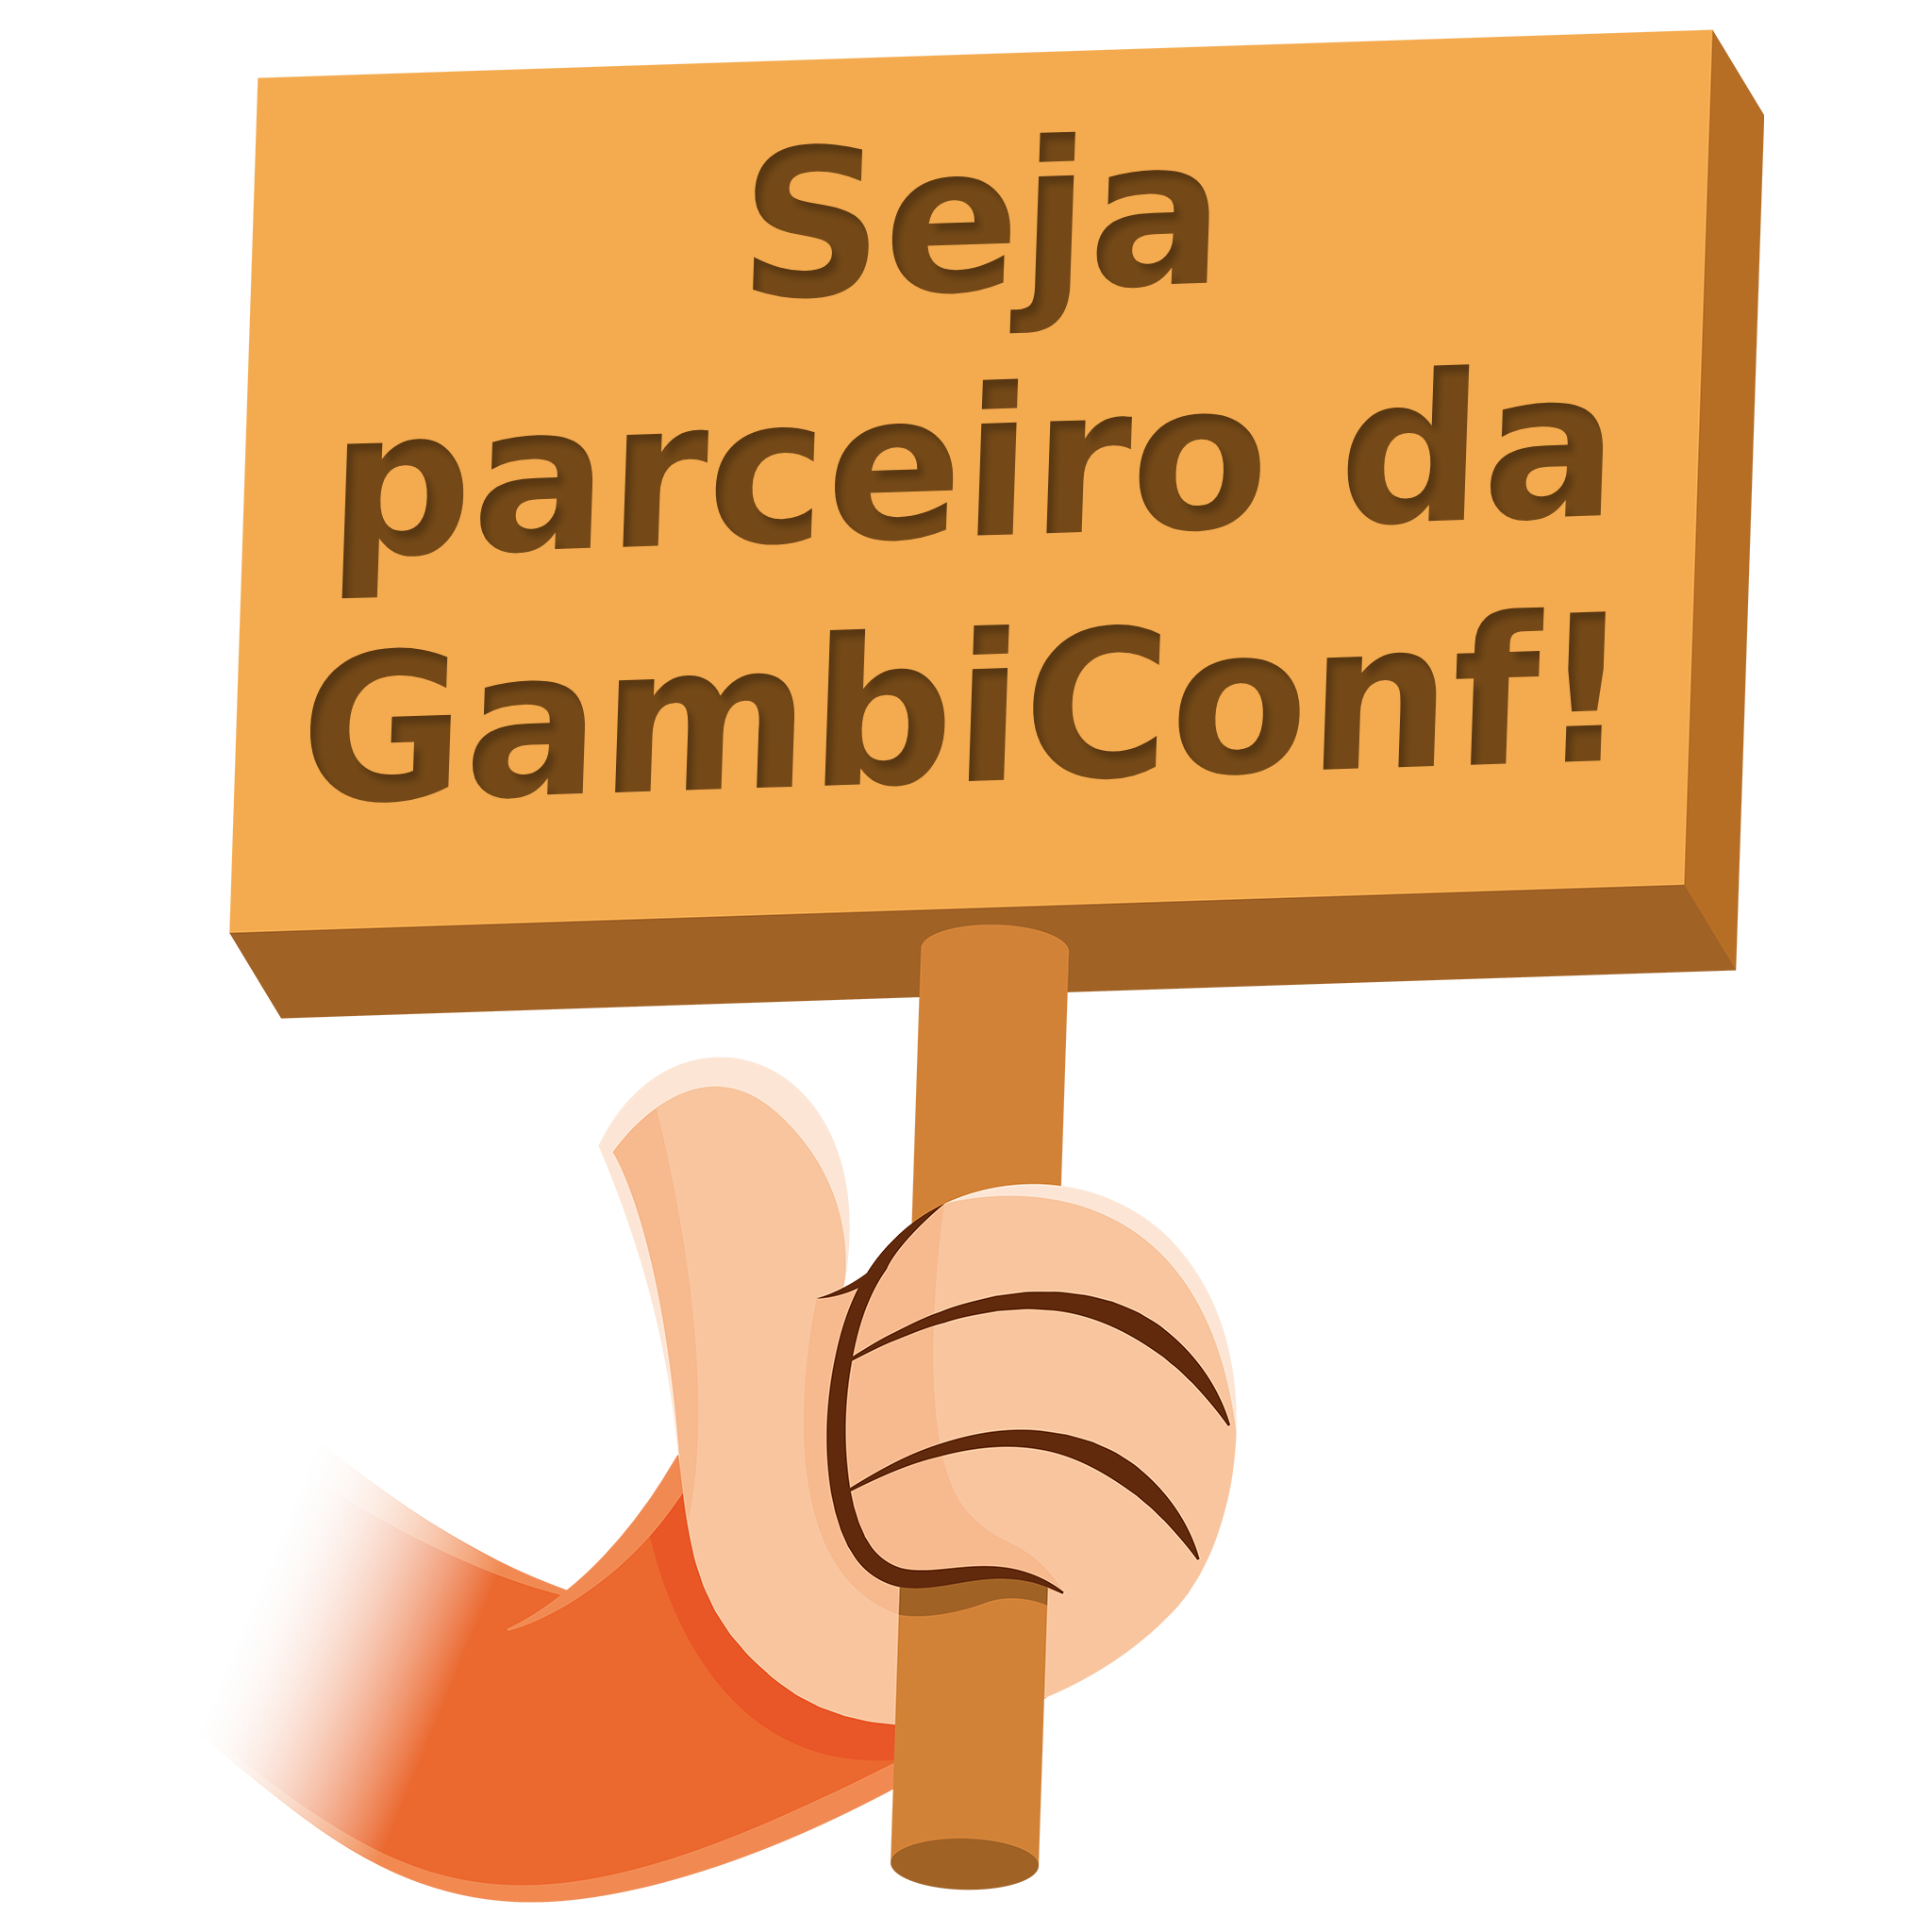 The GambiConf mascot holding a lifting a board written 'Become a partner'